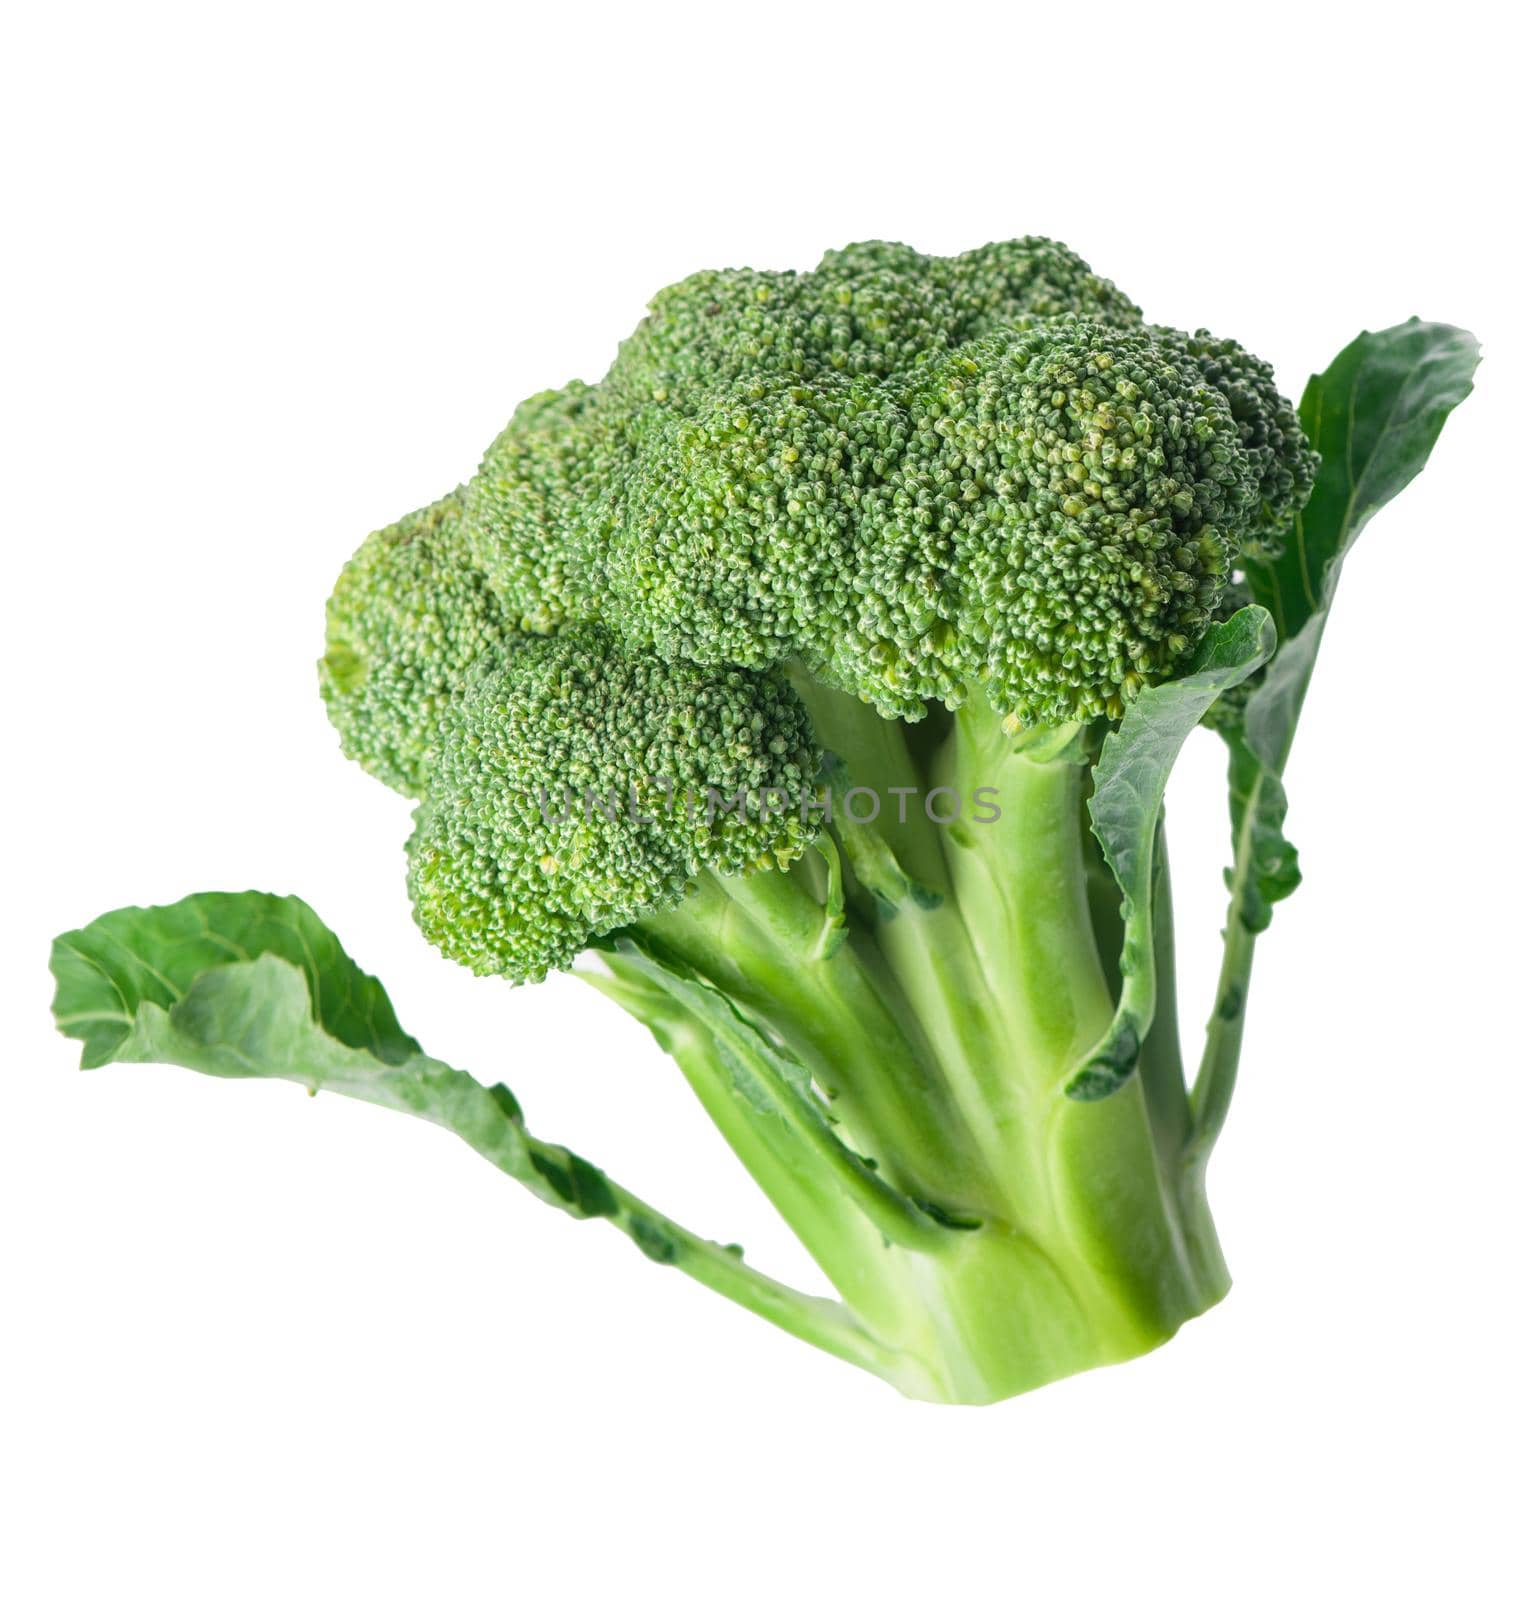 fresh green broccoli isolated on white background.